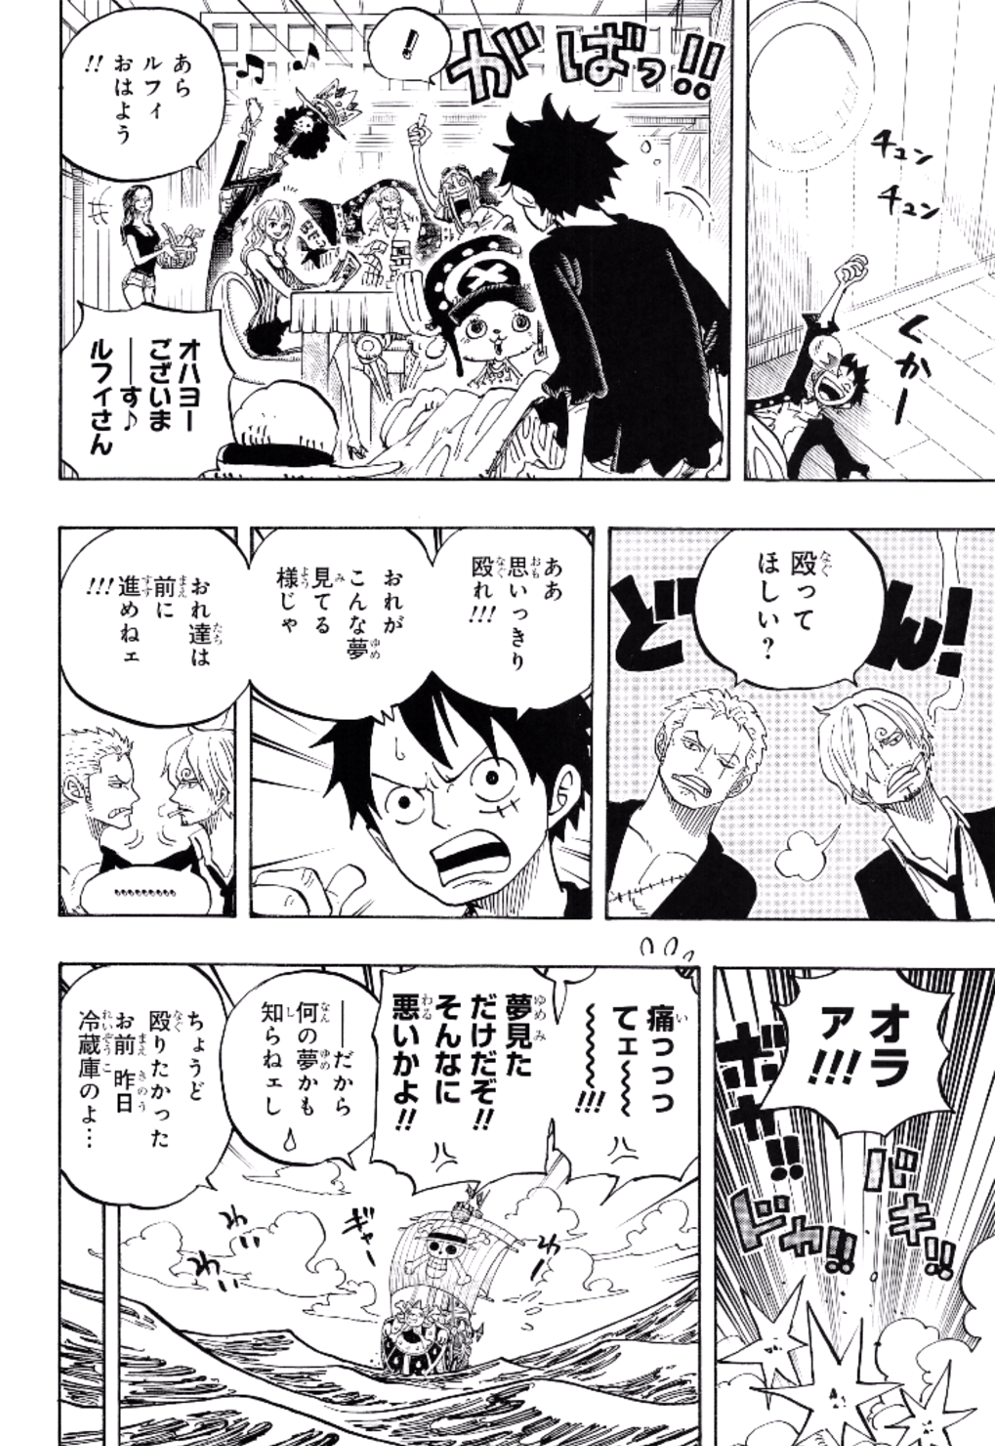 Special Episode Luff What If Sabo Saved Ace One Piece Fanpage